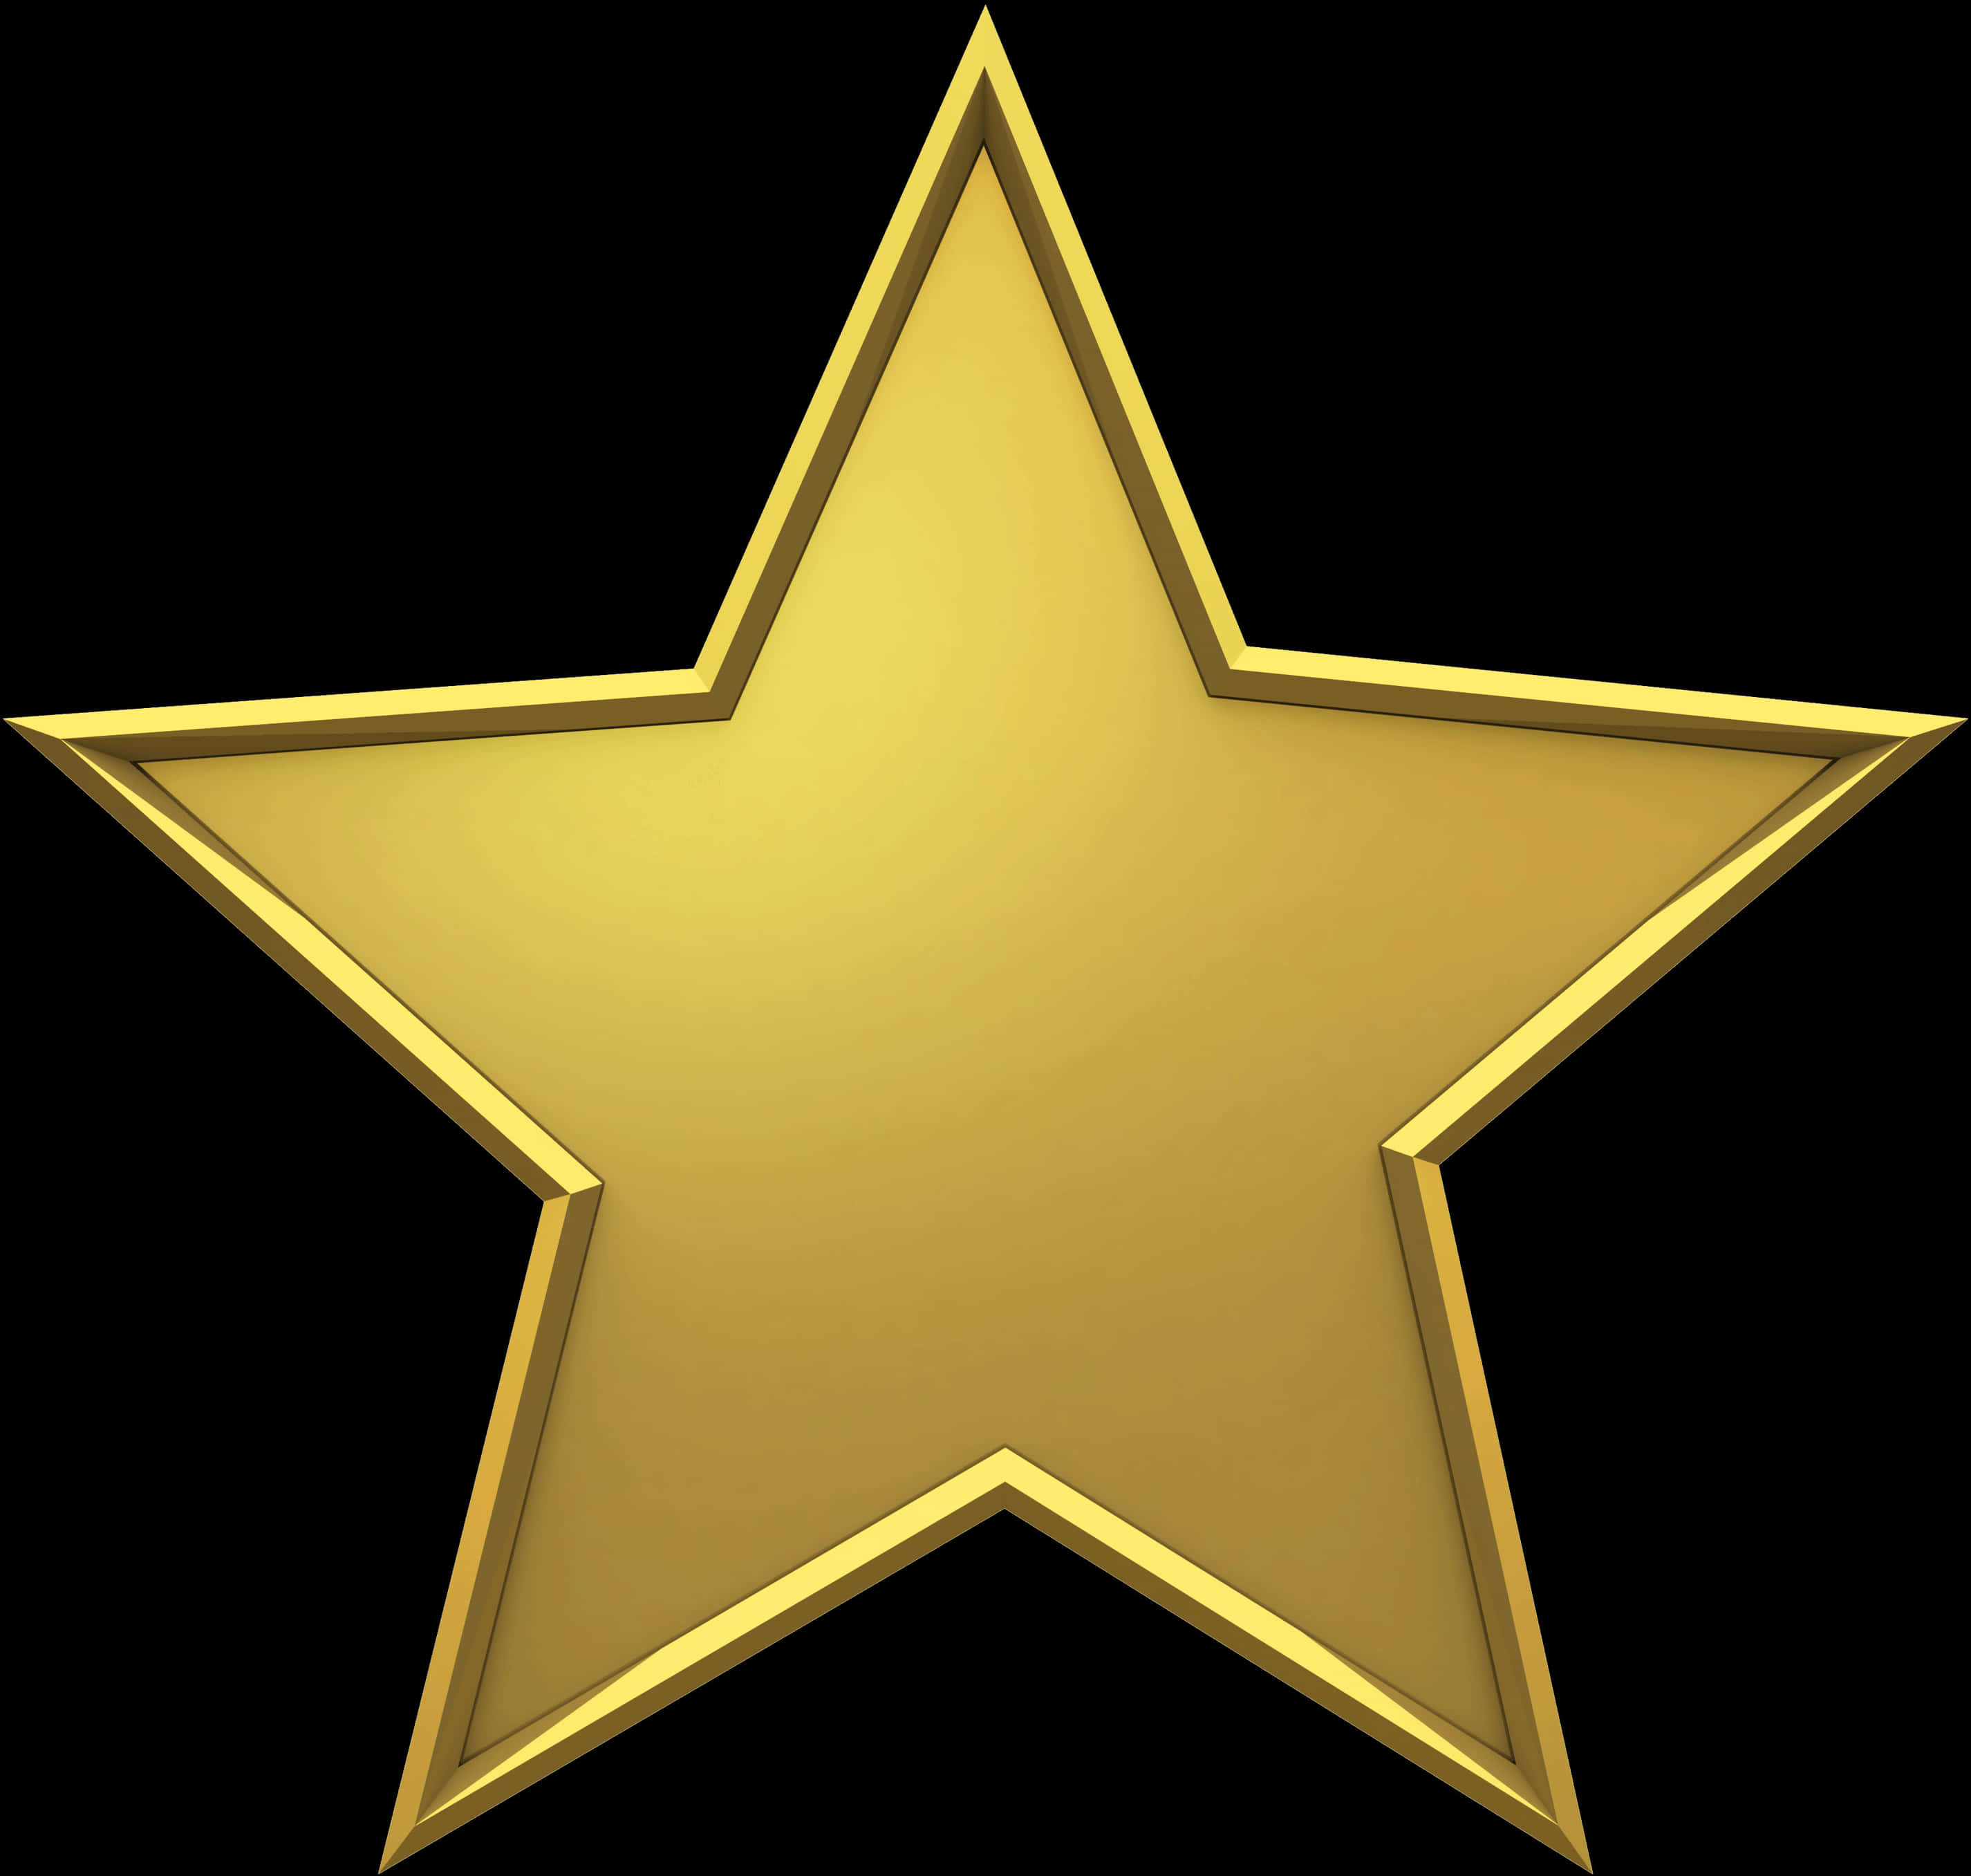 Golden Star Glittering Graphic PNG